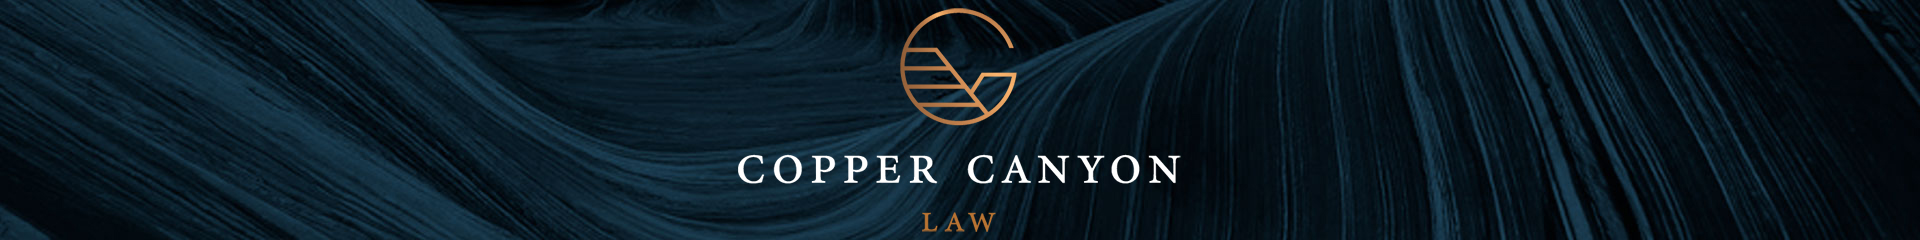 Copper Canyon Law Attorney Office Logo